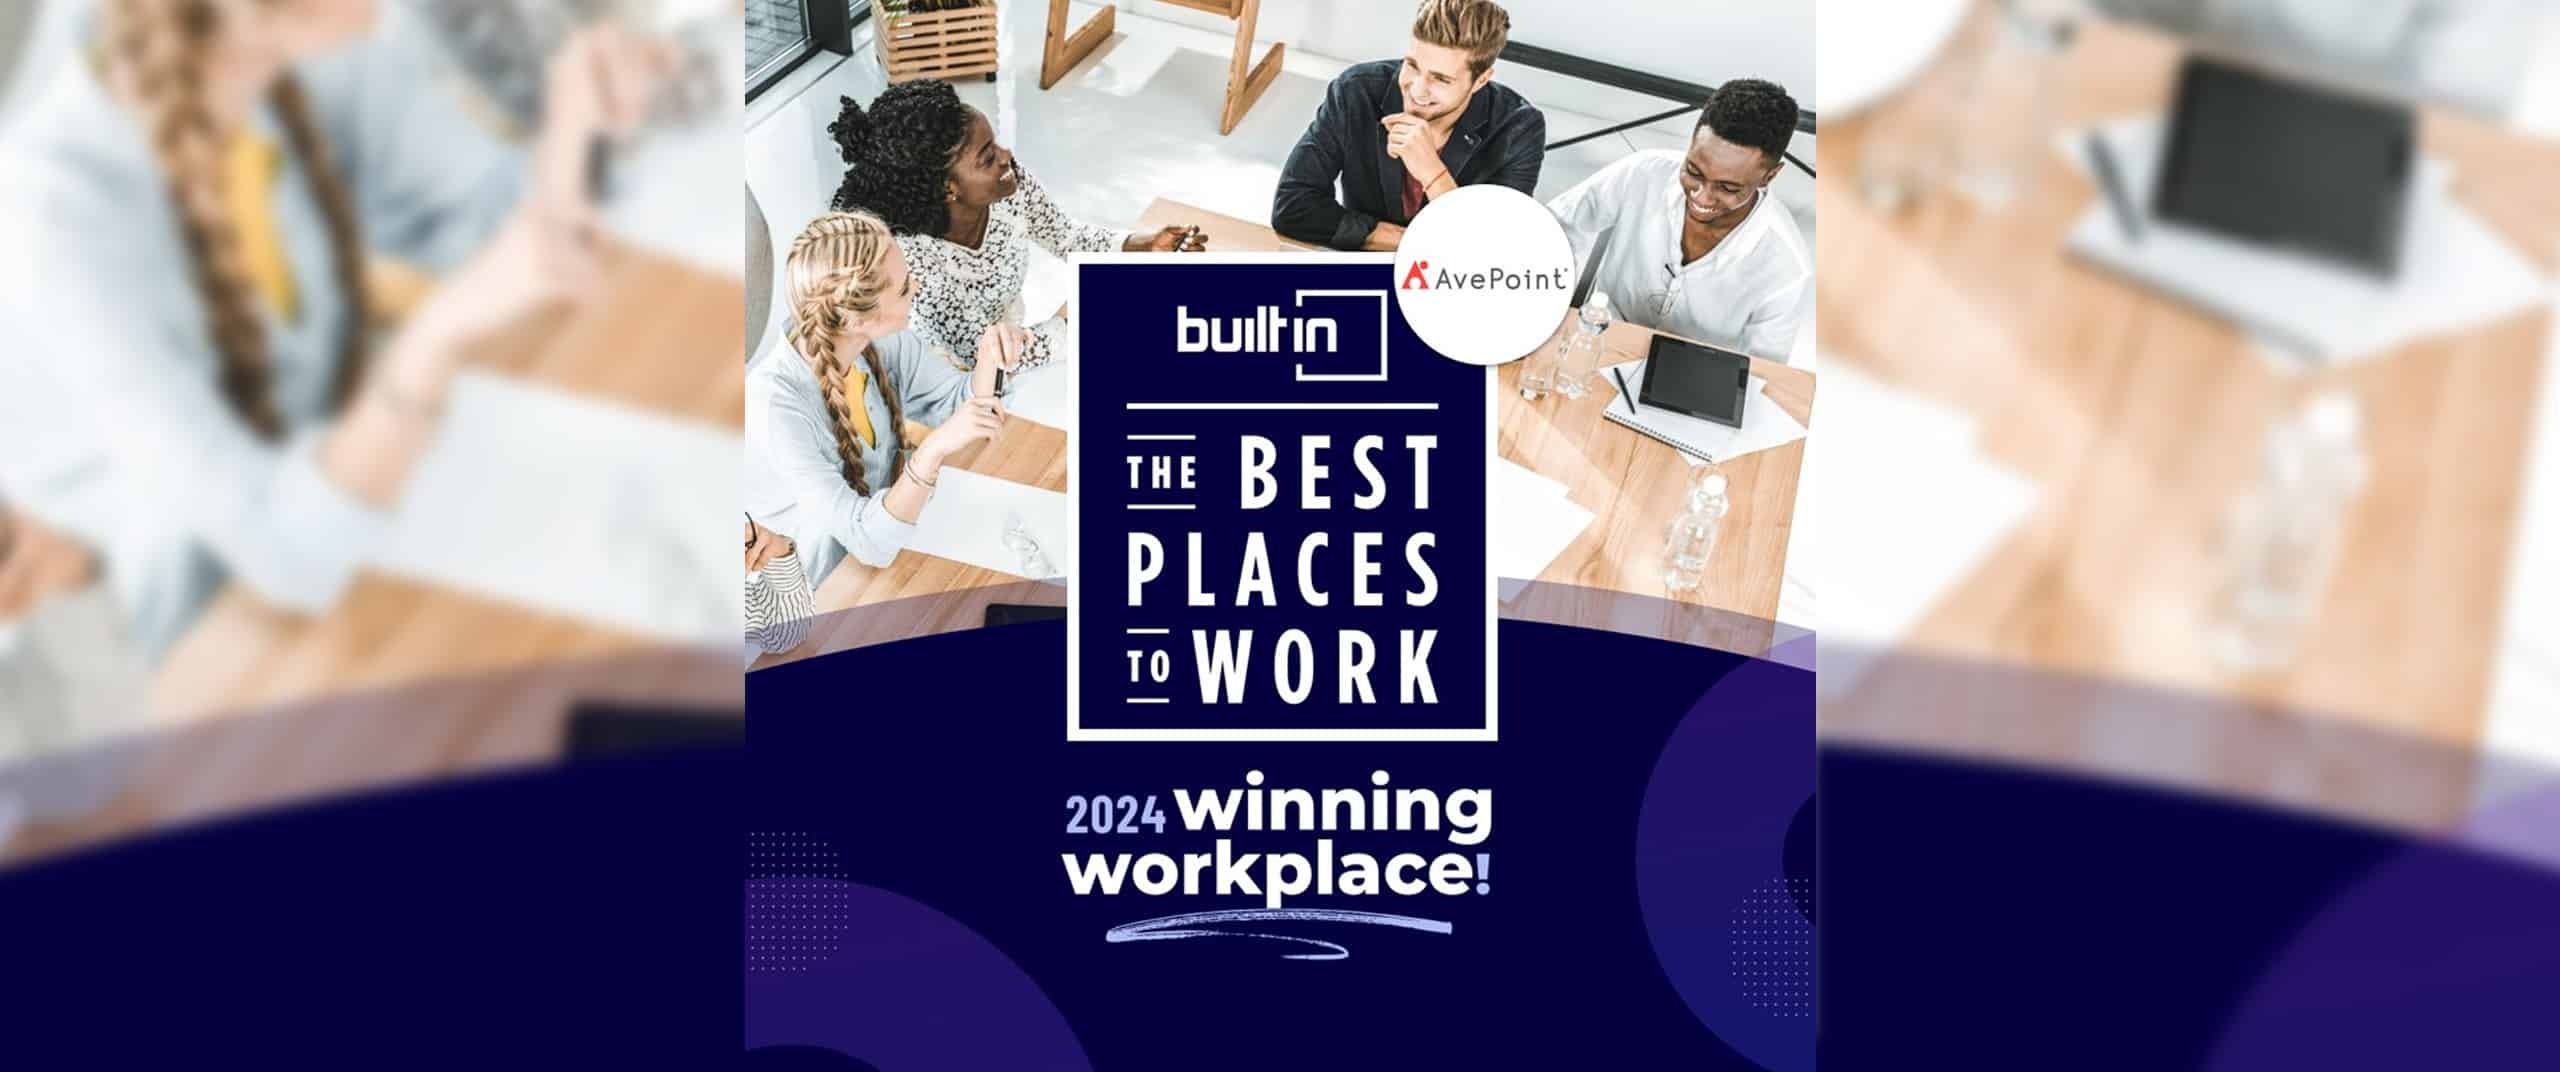 AvePoint Wins 7 Awards from BuiltIn’s Best Places to Work 2024 